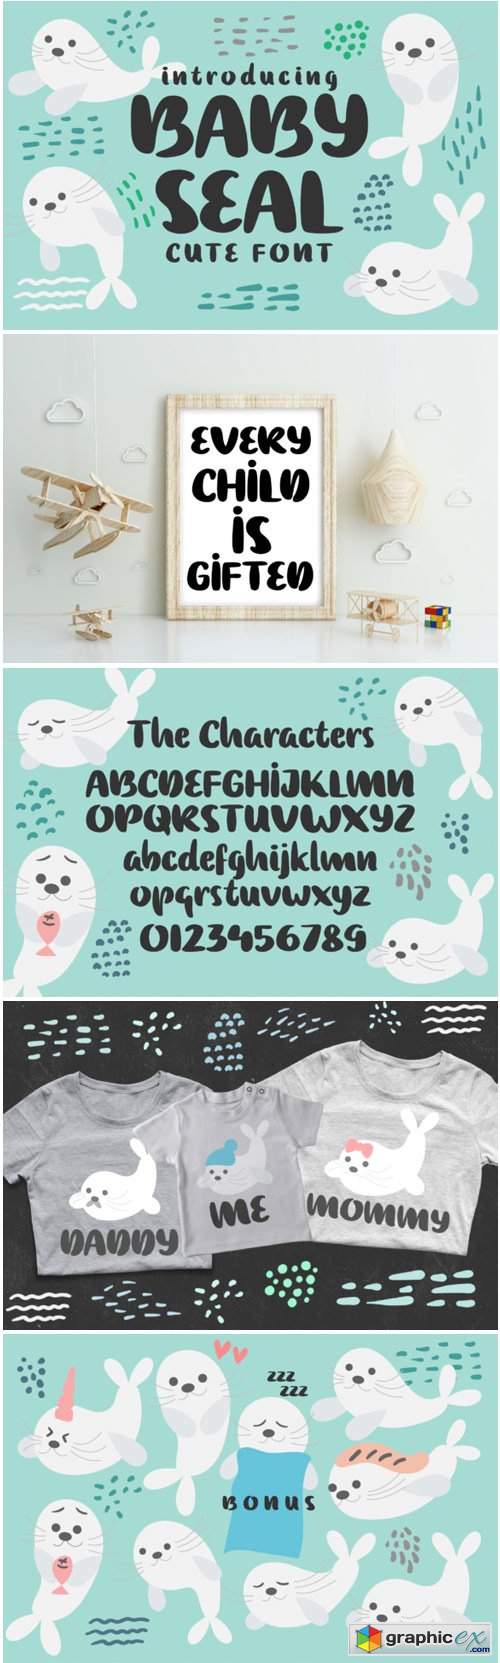 Baby Seal Font